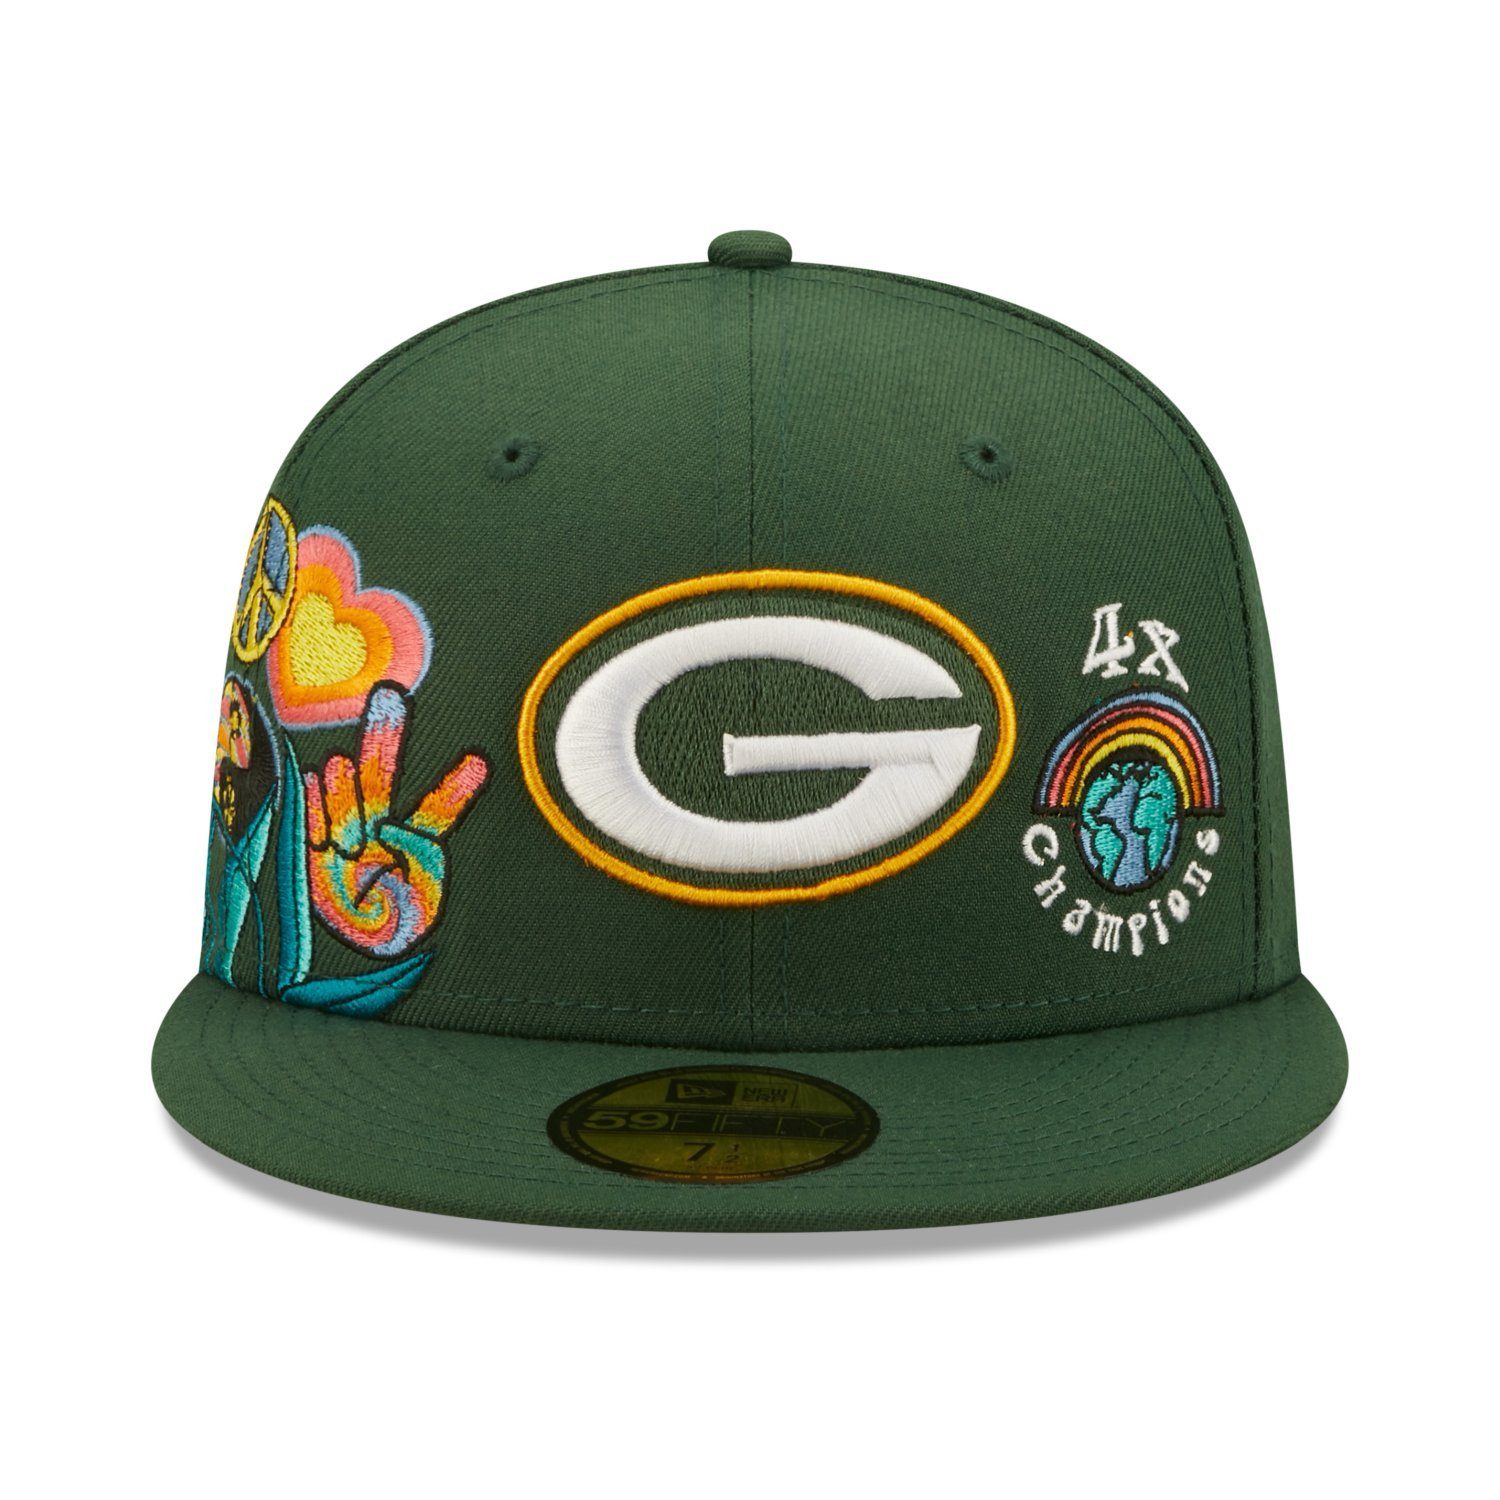 New Era Fitted Cap 59Fifty Bay Packers Green GROOVY